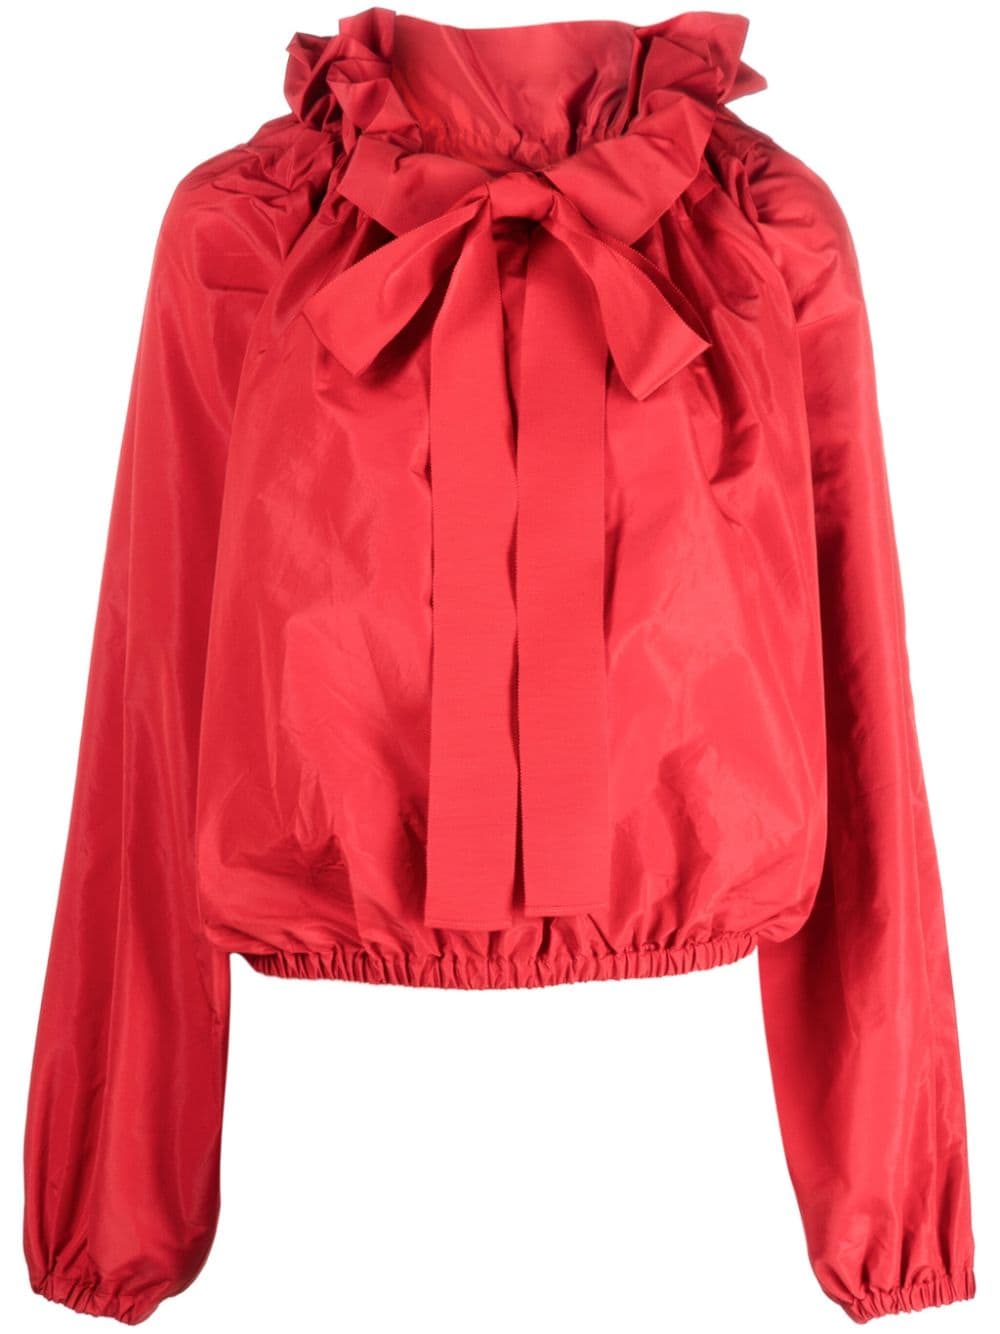 Patou pussy-bow puffed top - Red von Patou